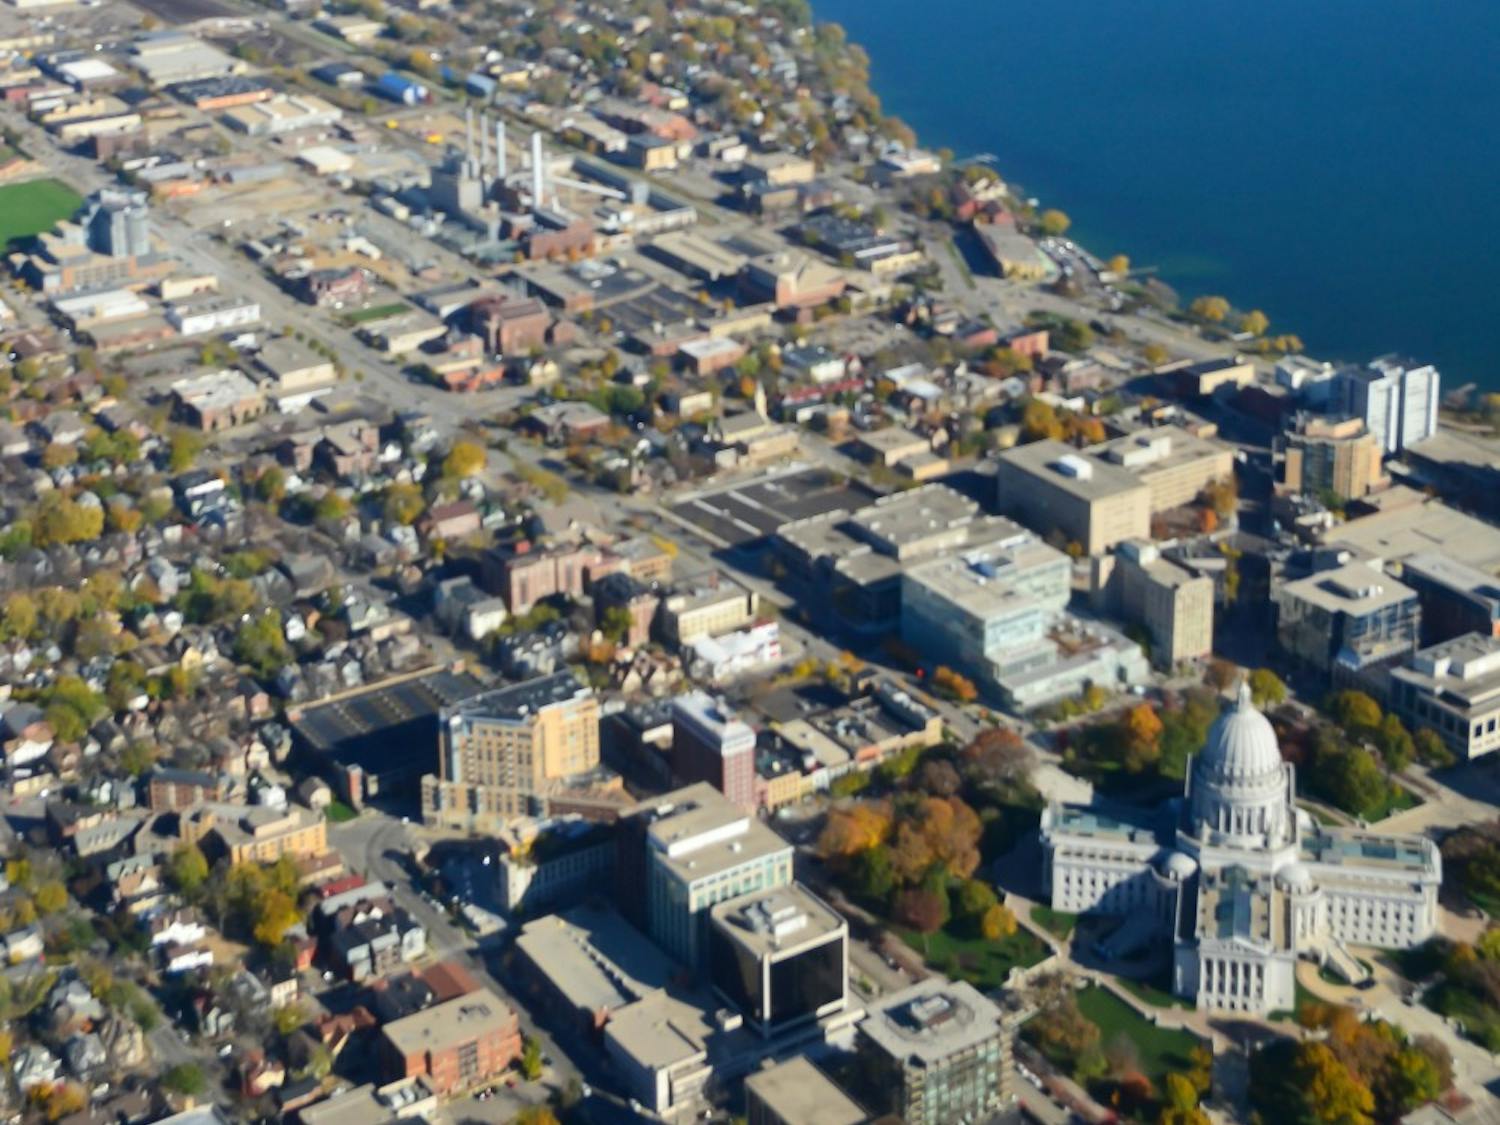 Dane County Board of Supervisors District Five, which is made up mostly of campus and Lake Mendota, could change following the 2020 census under the new commission.